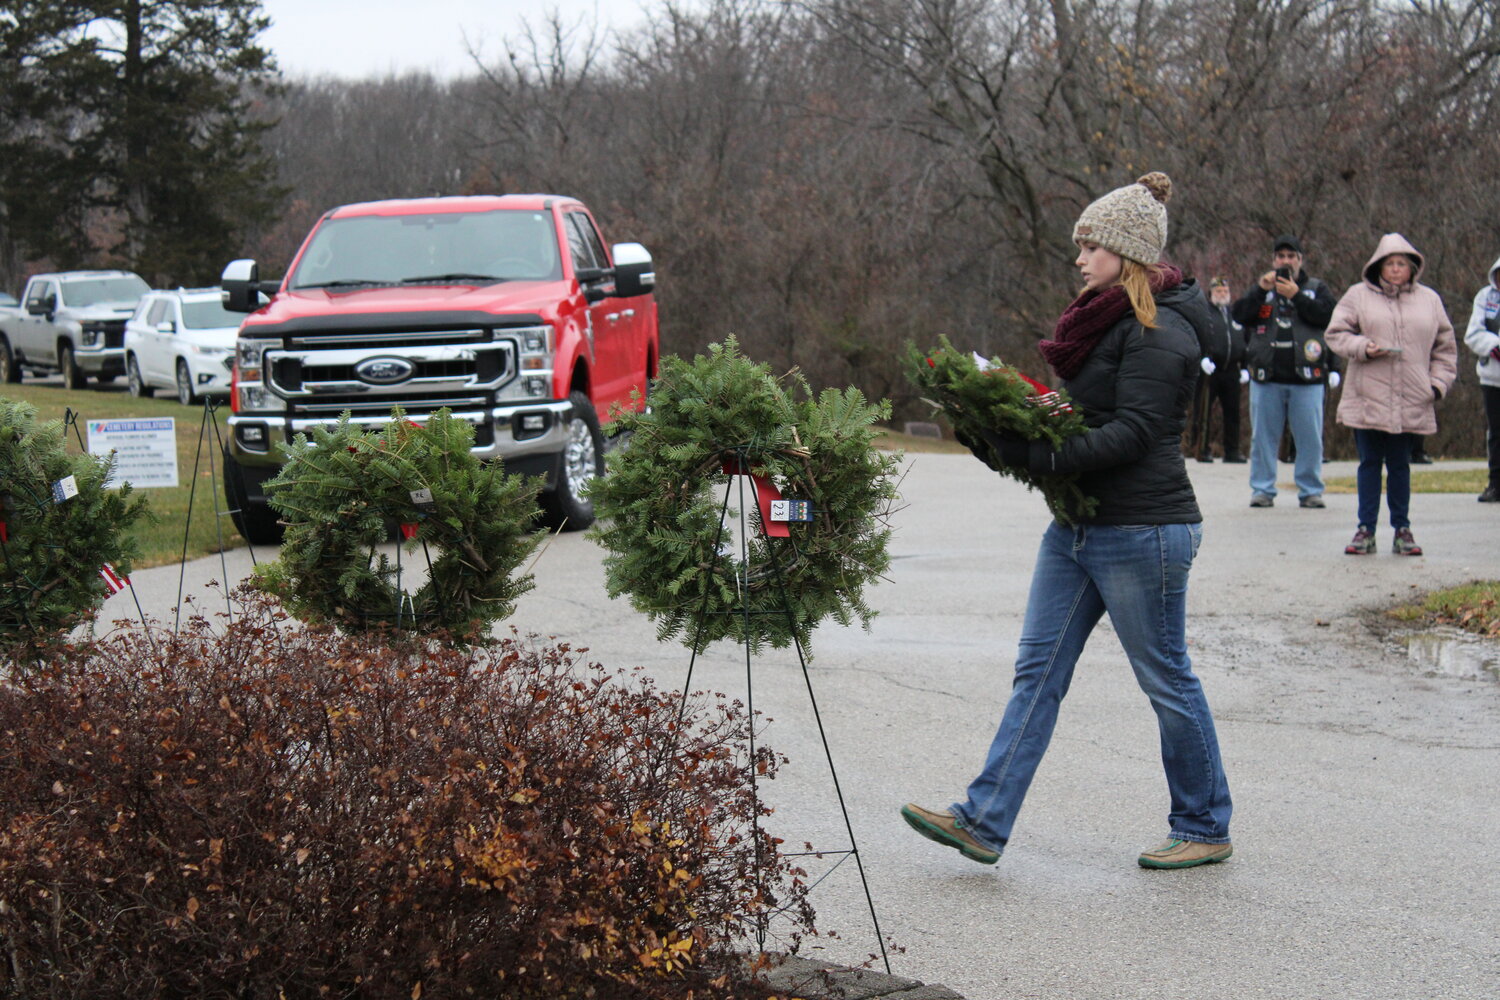 McKenna Jones prepares to place a wreath honoring the U.S. Coast Guard during the Wreaths Across America ceremony Dec. 16 at the Warrenton City Cemetery.